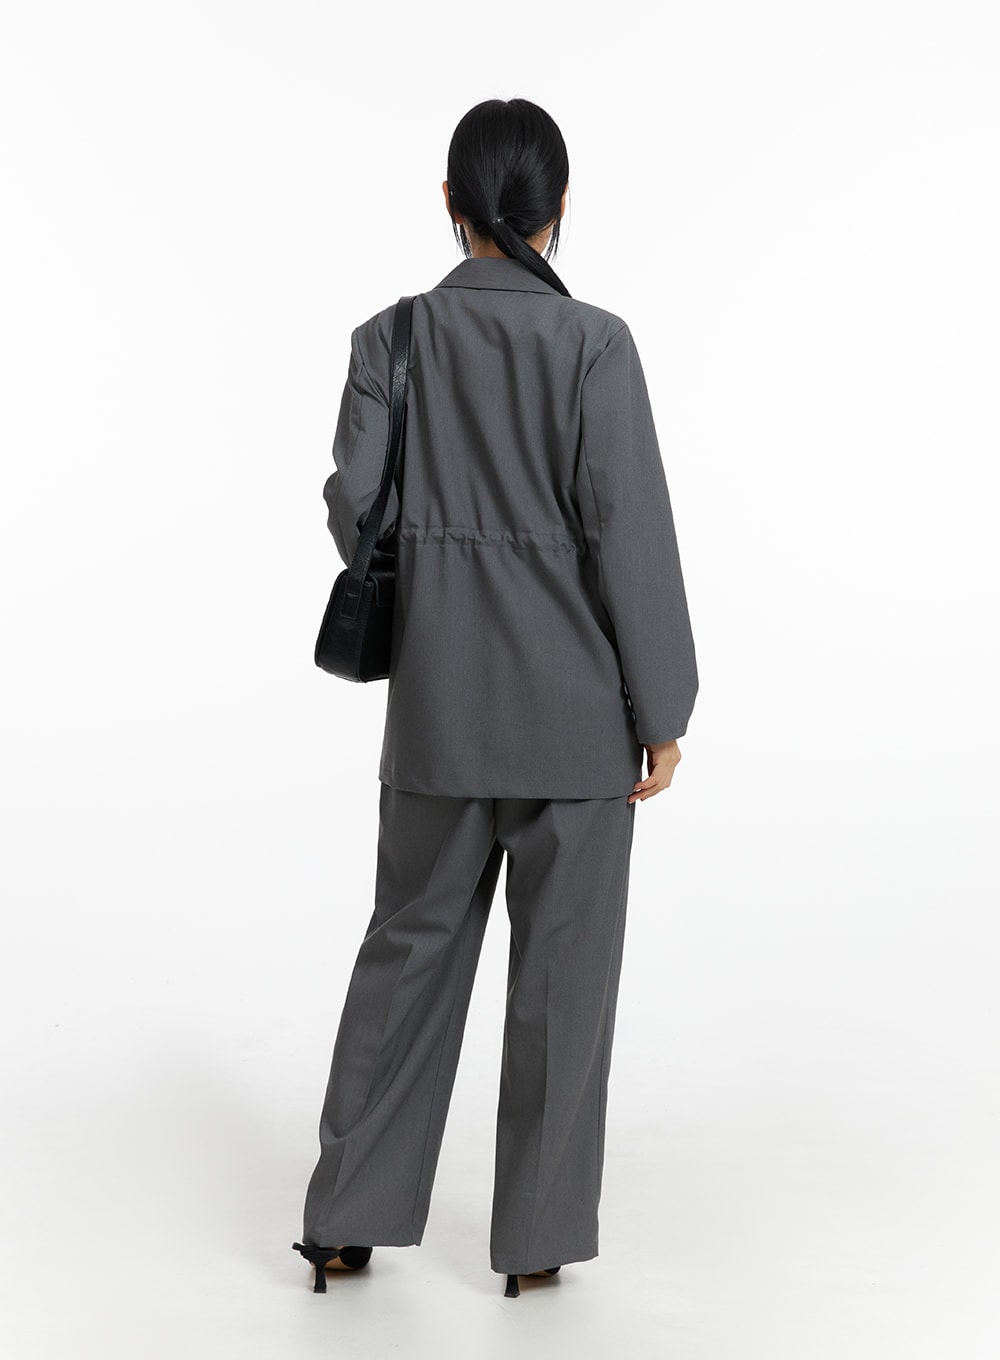 oversized-trousers-im414